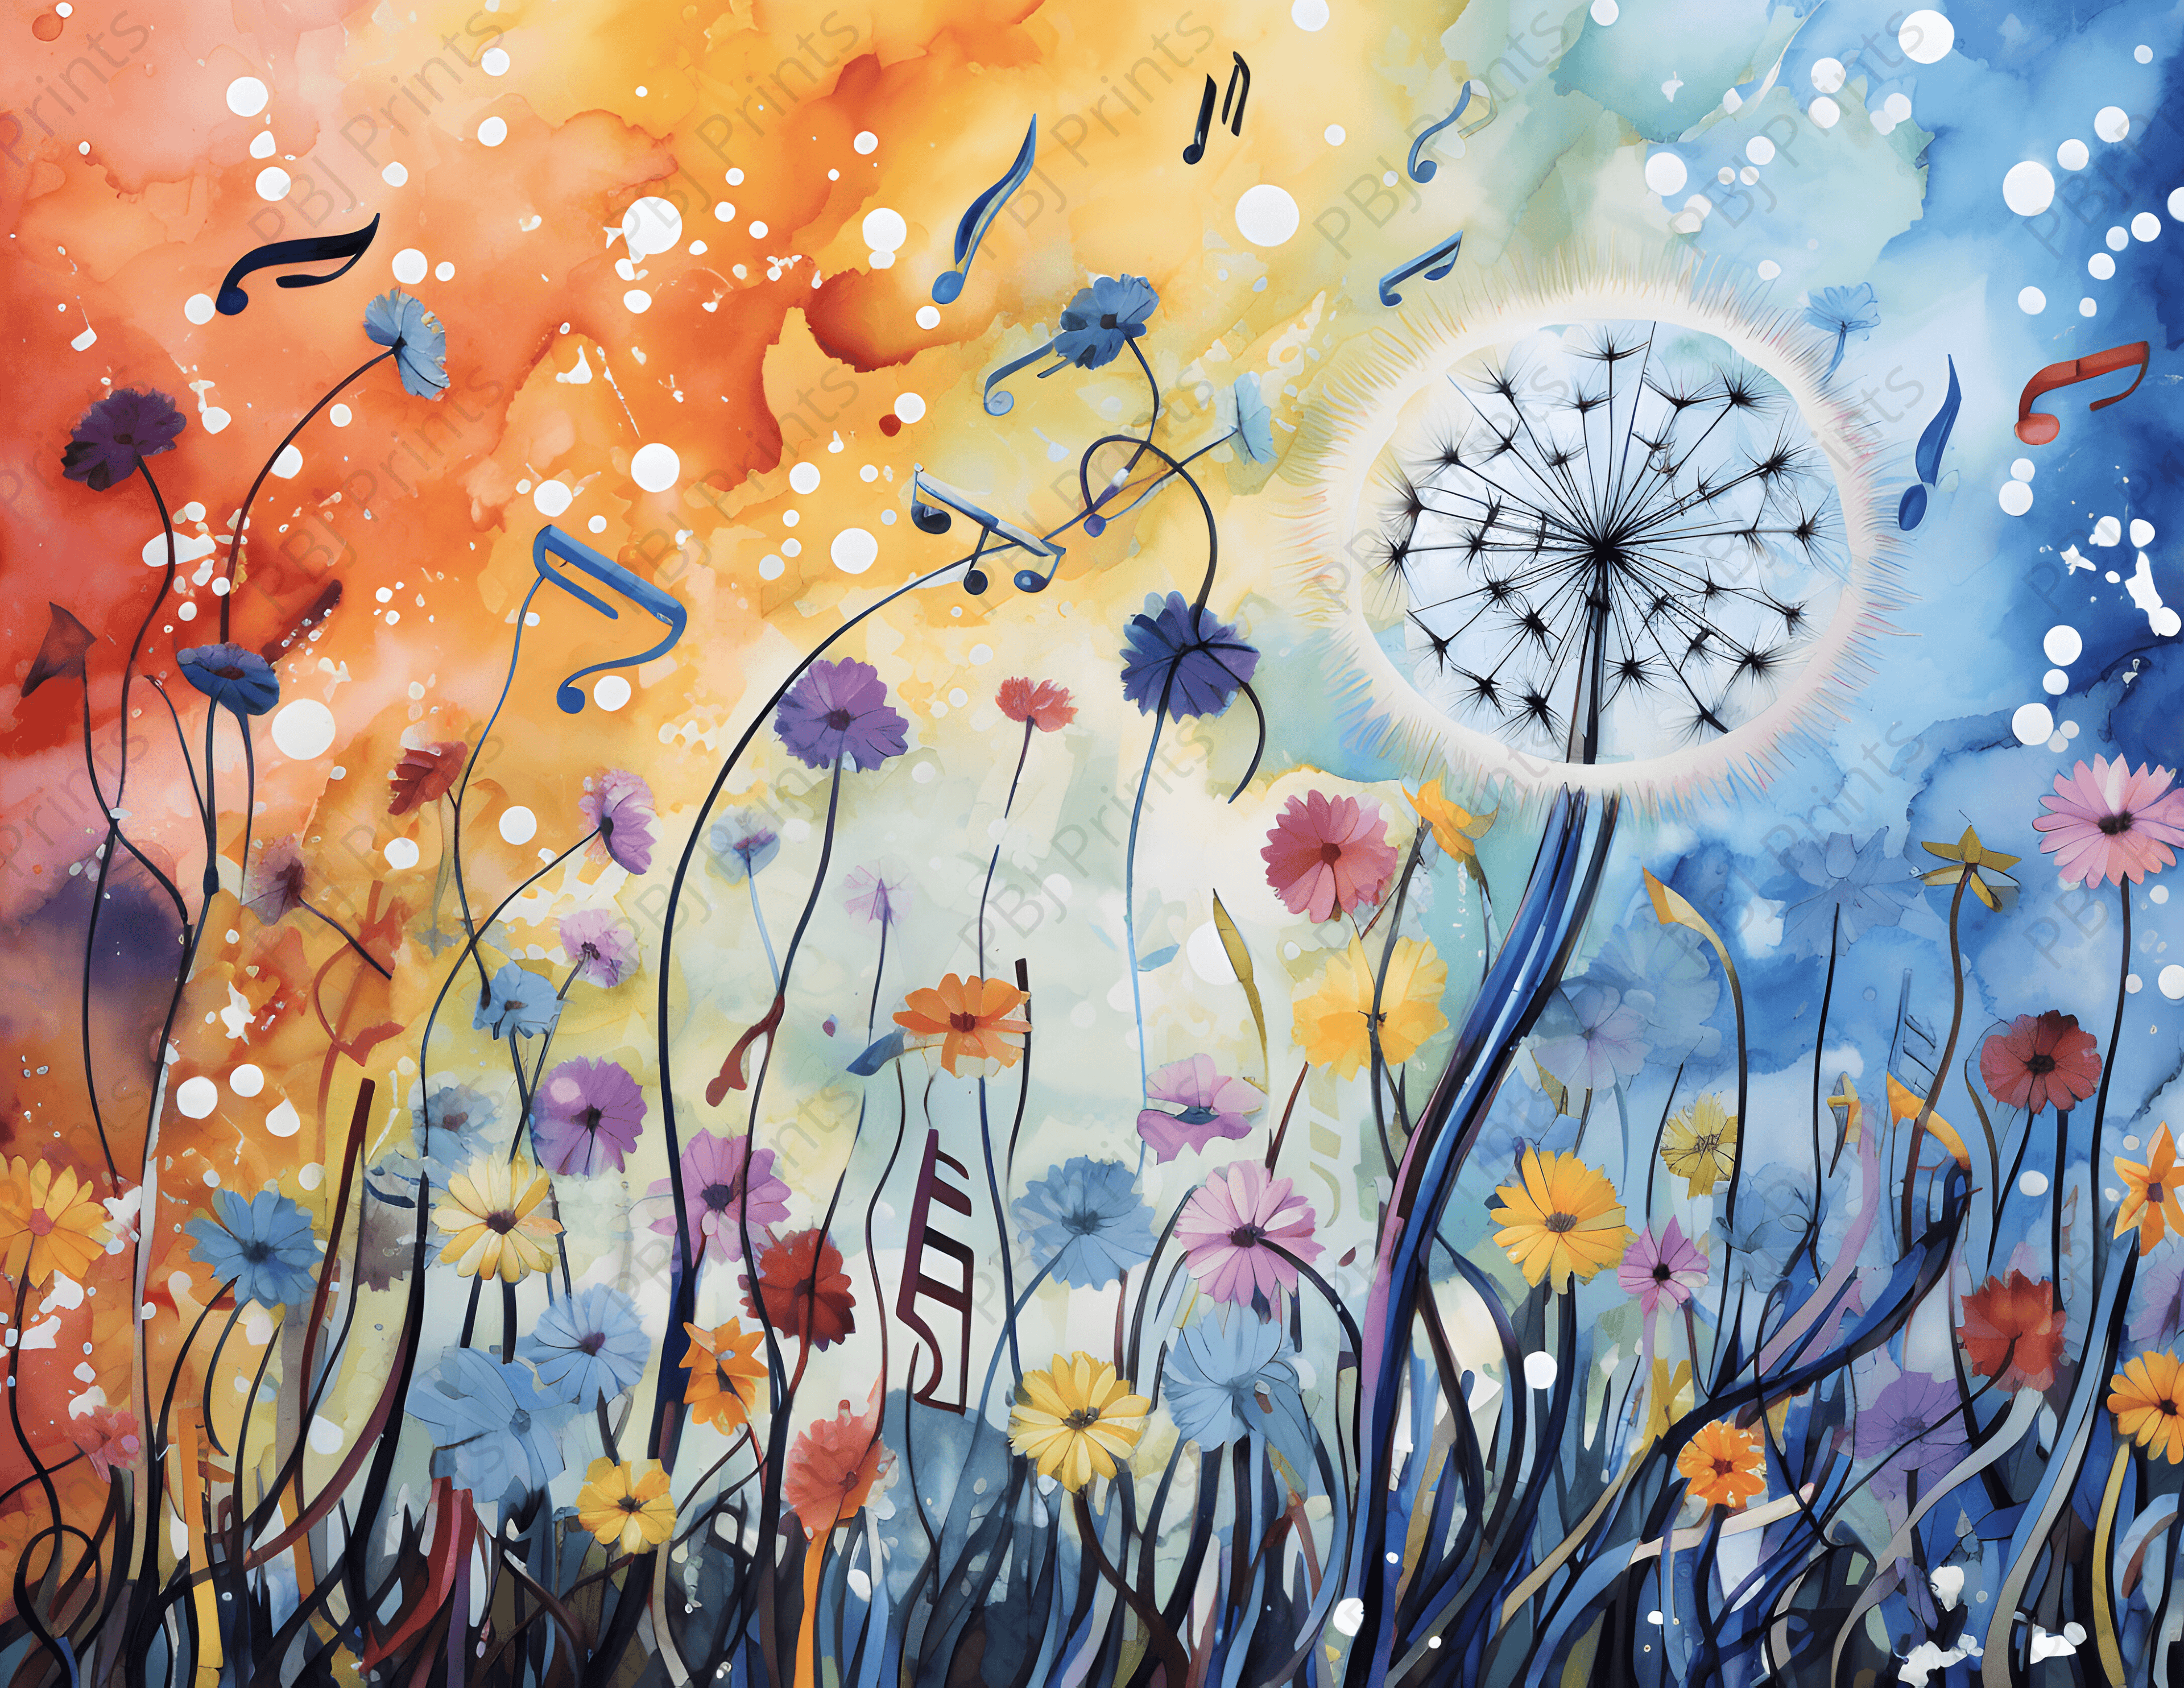 Dandelion &amp; Flowers Emerging - Artist by 2chattychicks teaching eclectic creations - Art Prints, Decoupage Rice Paper, Flat Canvas Prints, Giclee Prints, Photo Prints, Poster Prints